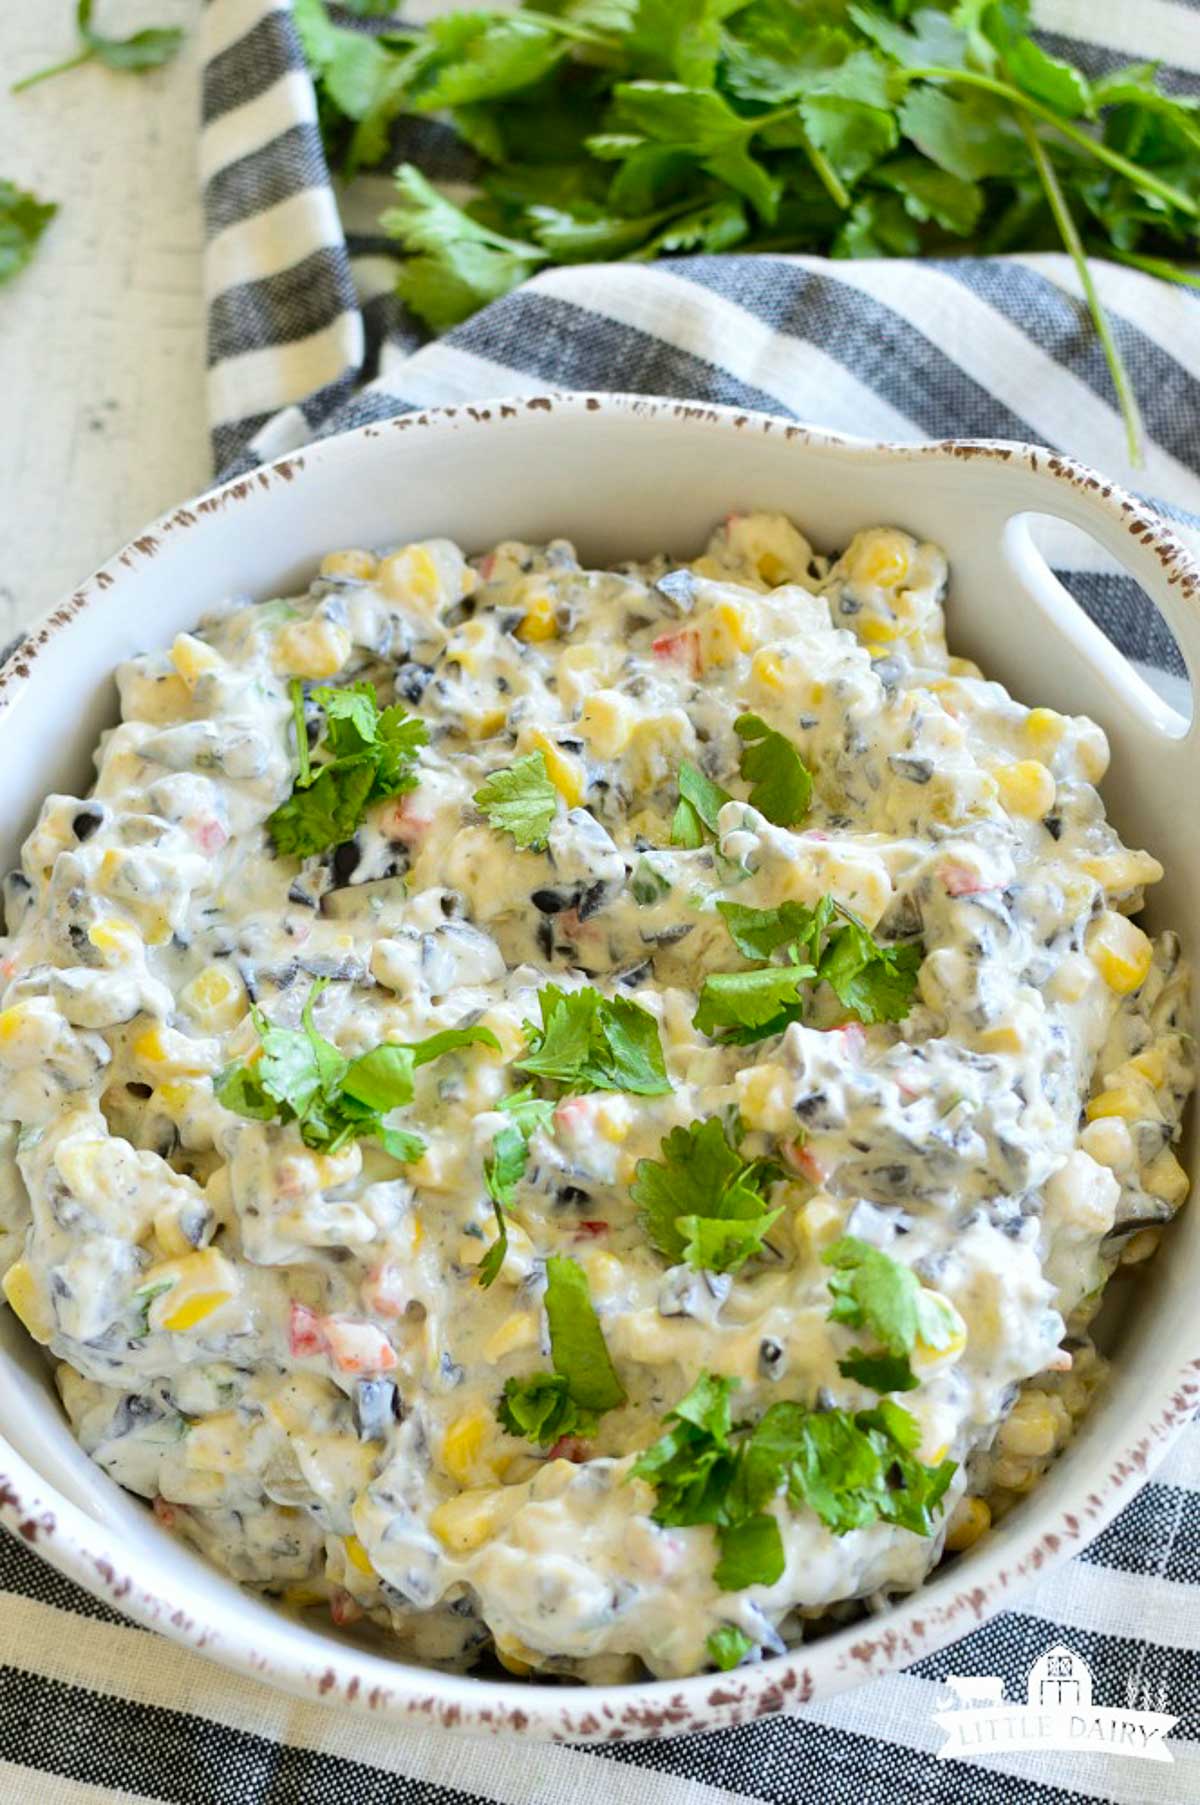 Veggie ranch dip with corn, beans, and herbs.